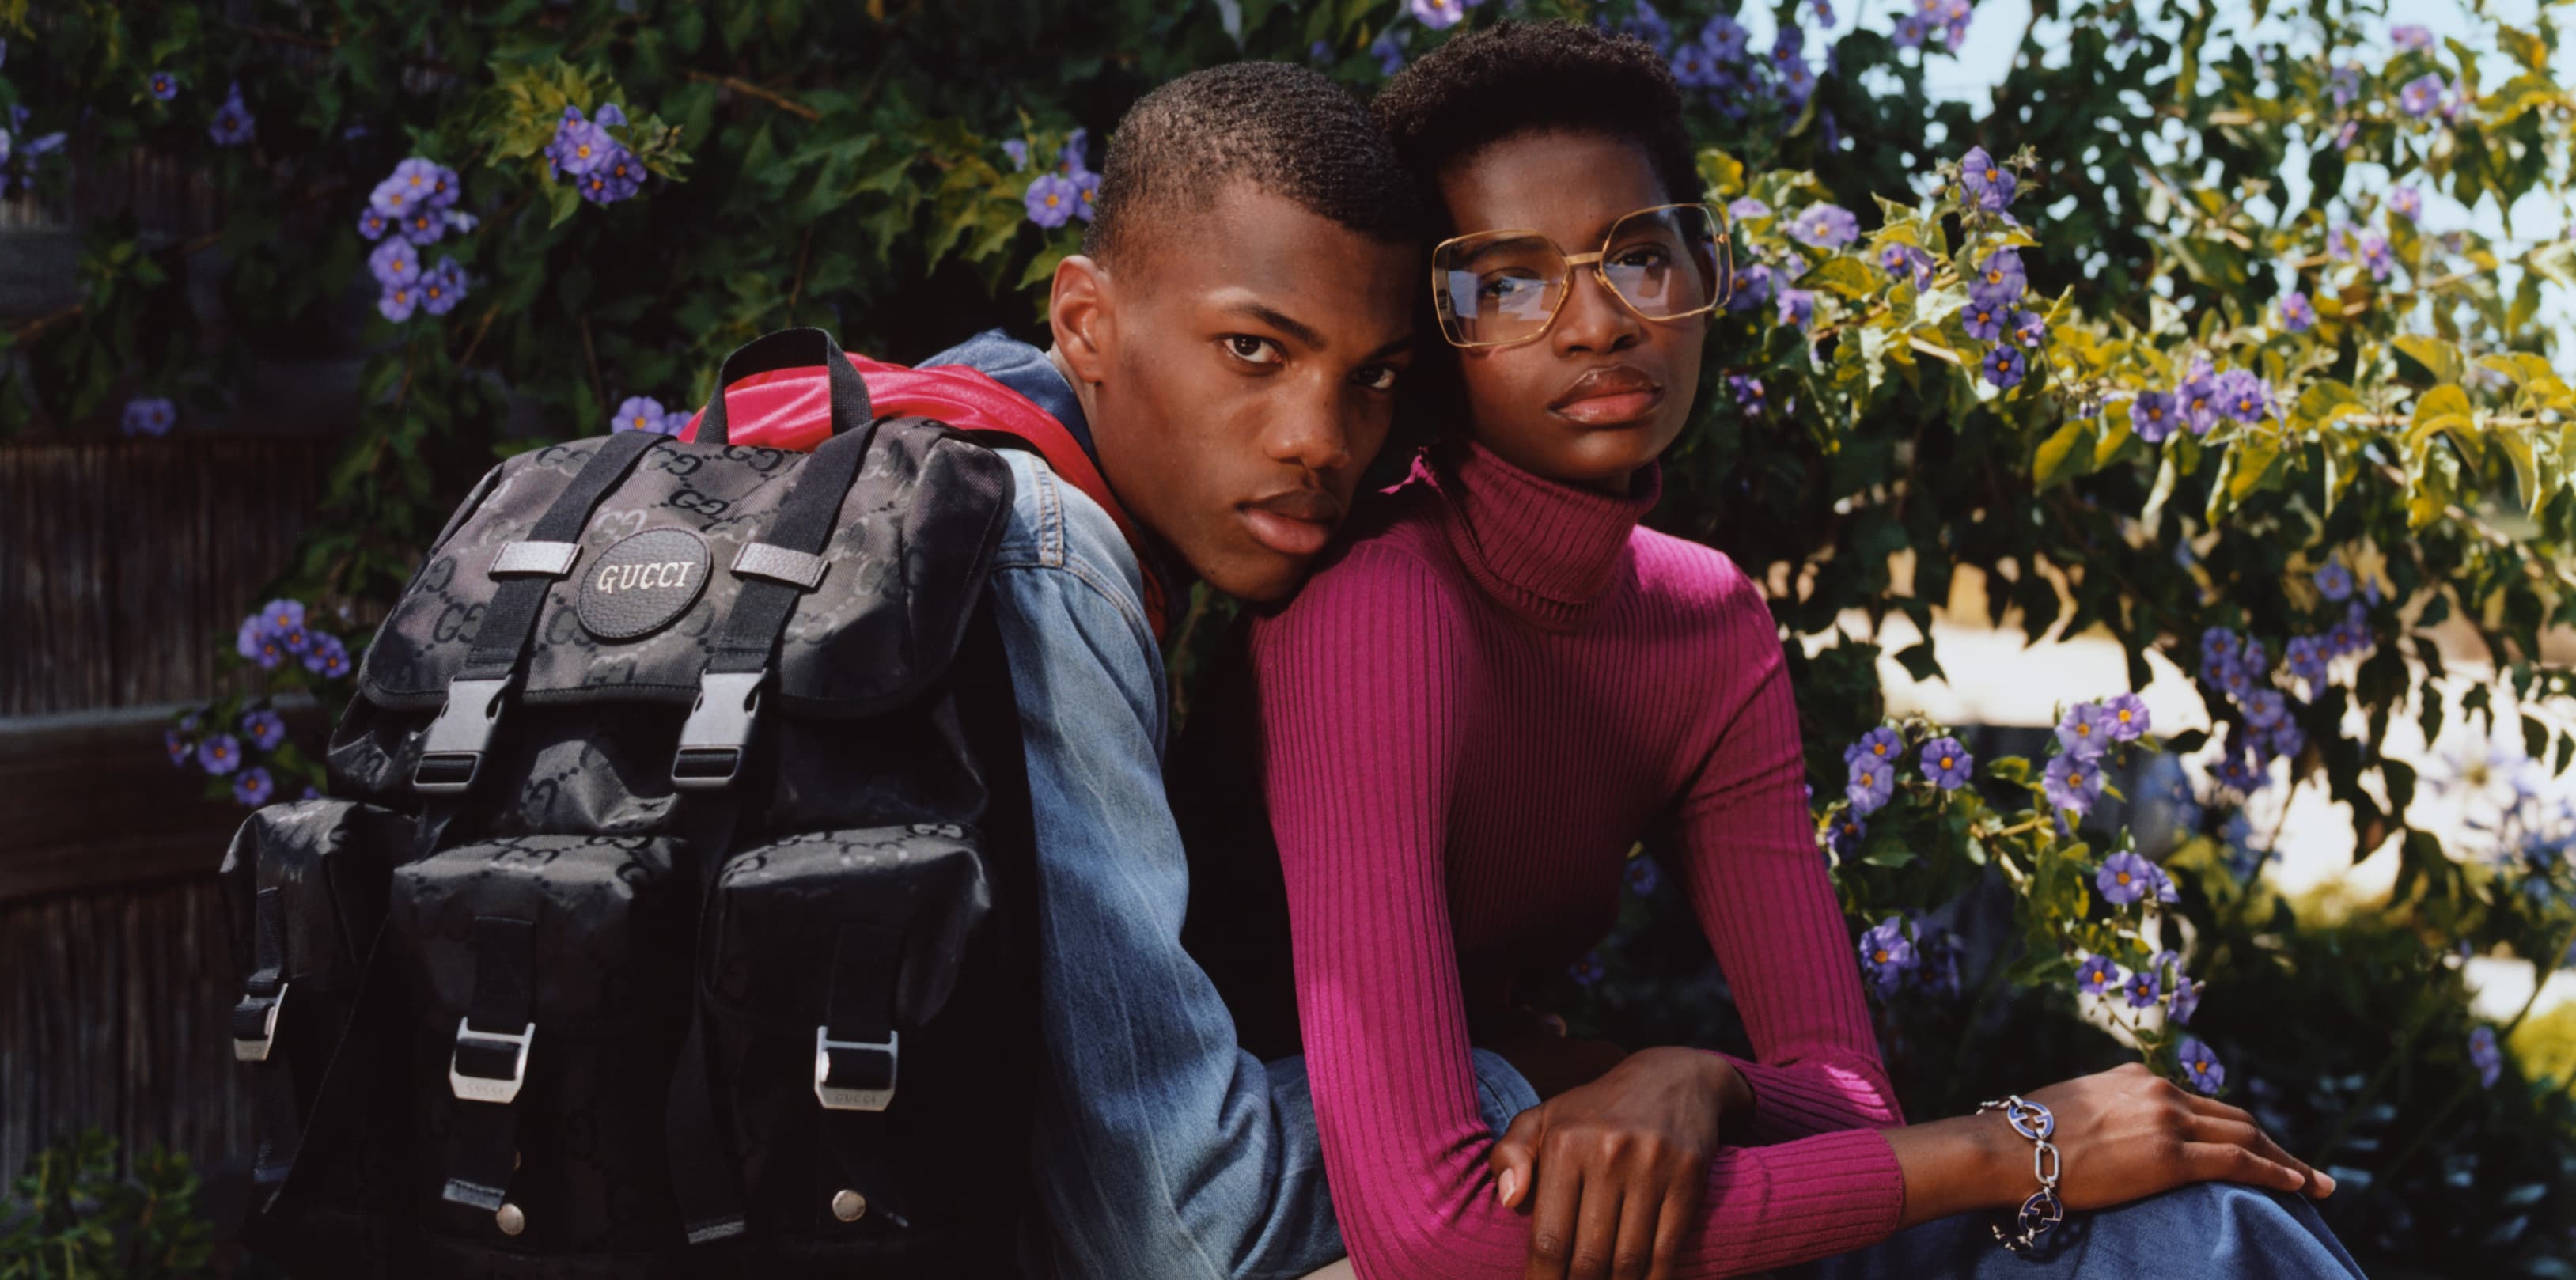 A young Black man wearing a black regenerated nylon GG pattern backpack is seated in a garden with his arm around the waist of a young Black woman. Behind them is a large Paraguyan nightshade bush with purple and yellow flowers as well as a weathered wooden fence. He is wearing a denim jacket with beige pants, and she is wearing a raspberry colored ribbed turtleneck and oversize square metal frame eyeglasses.